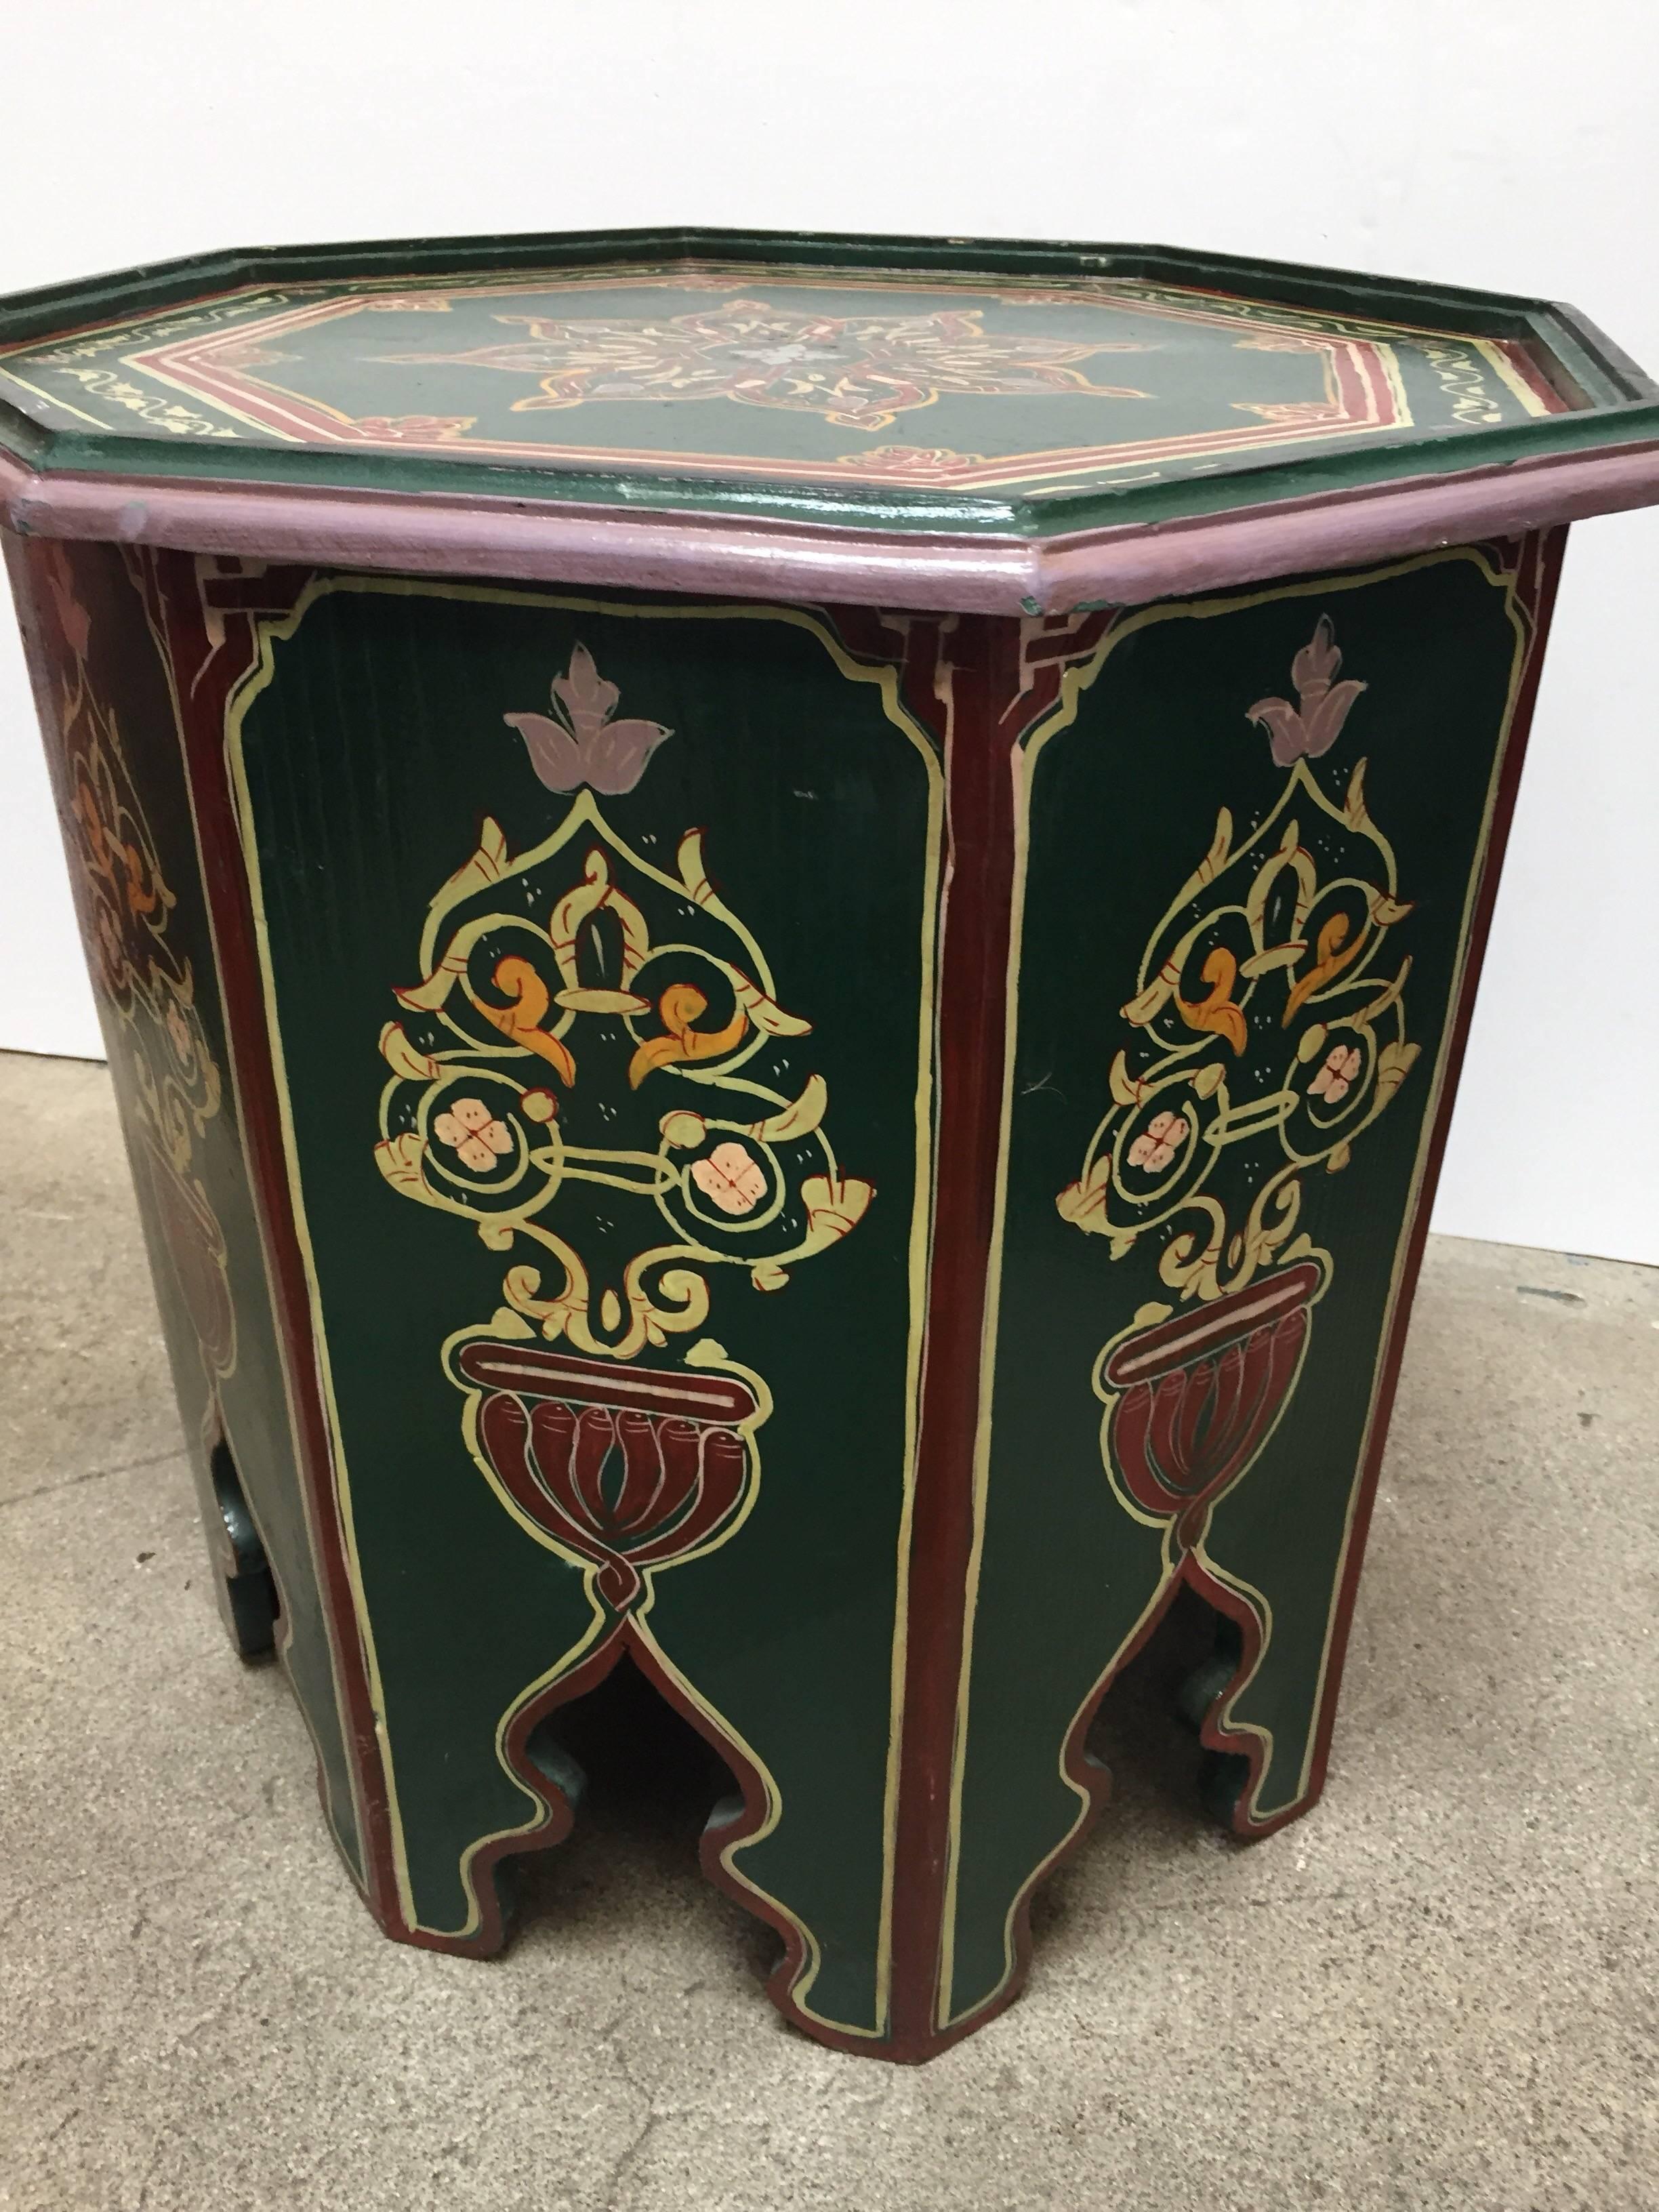 Pair of Moroccan Hand Painted Table with Moorish Designs 2